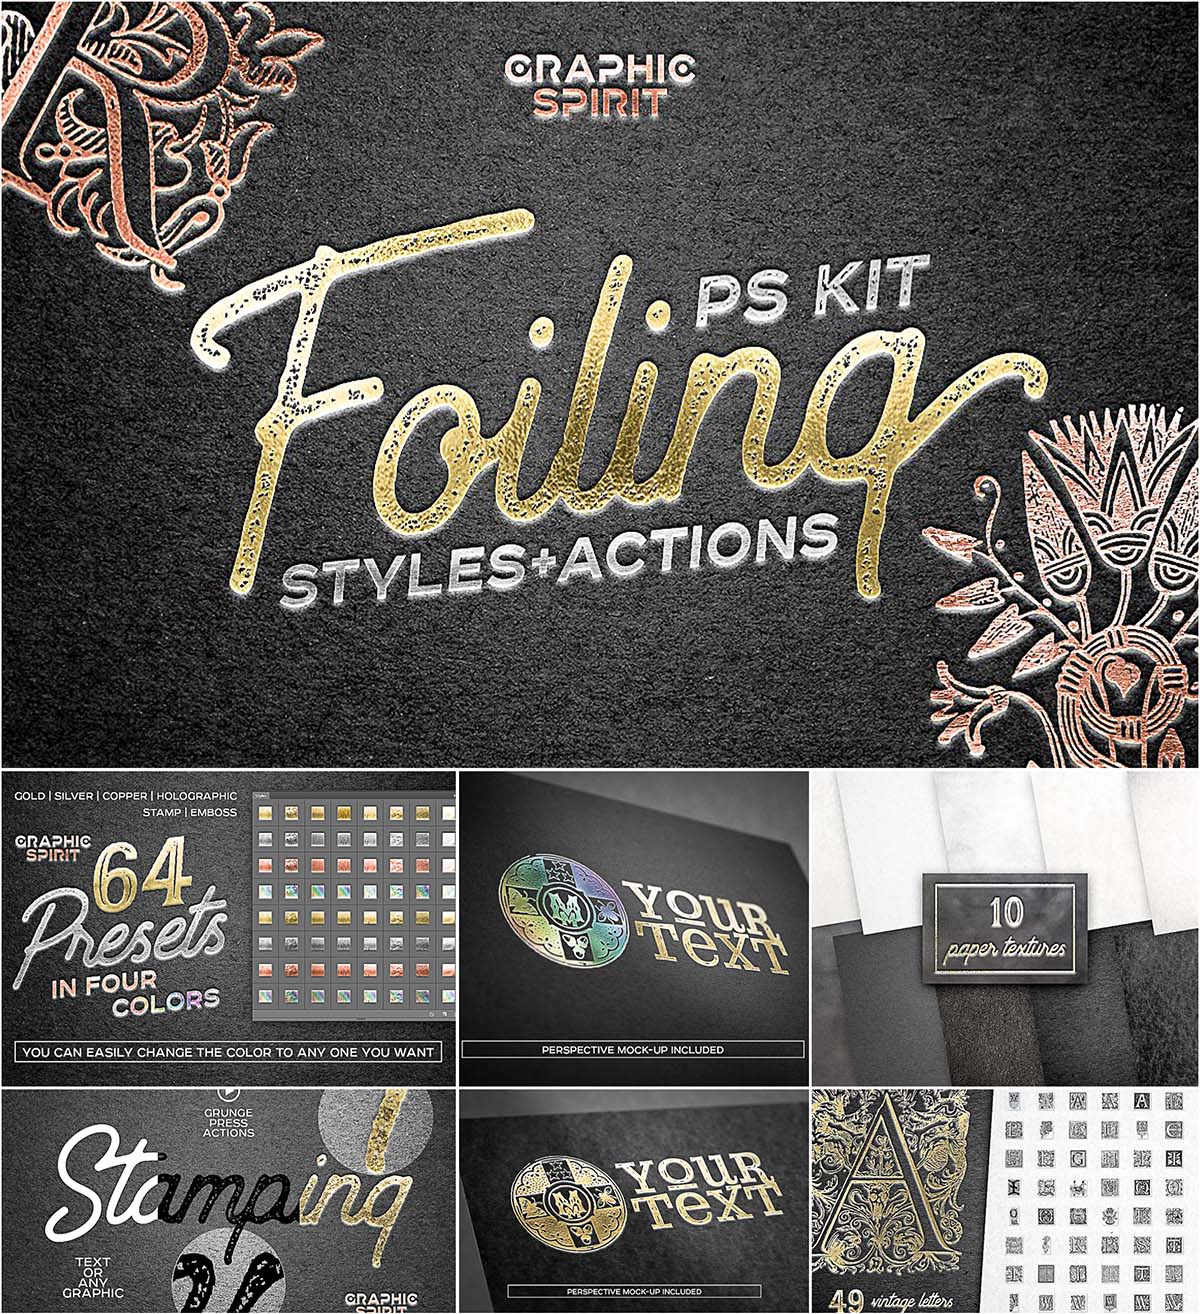 Foiling styles and actions